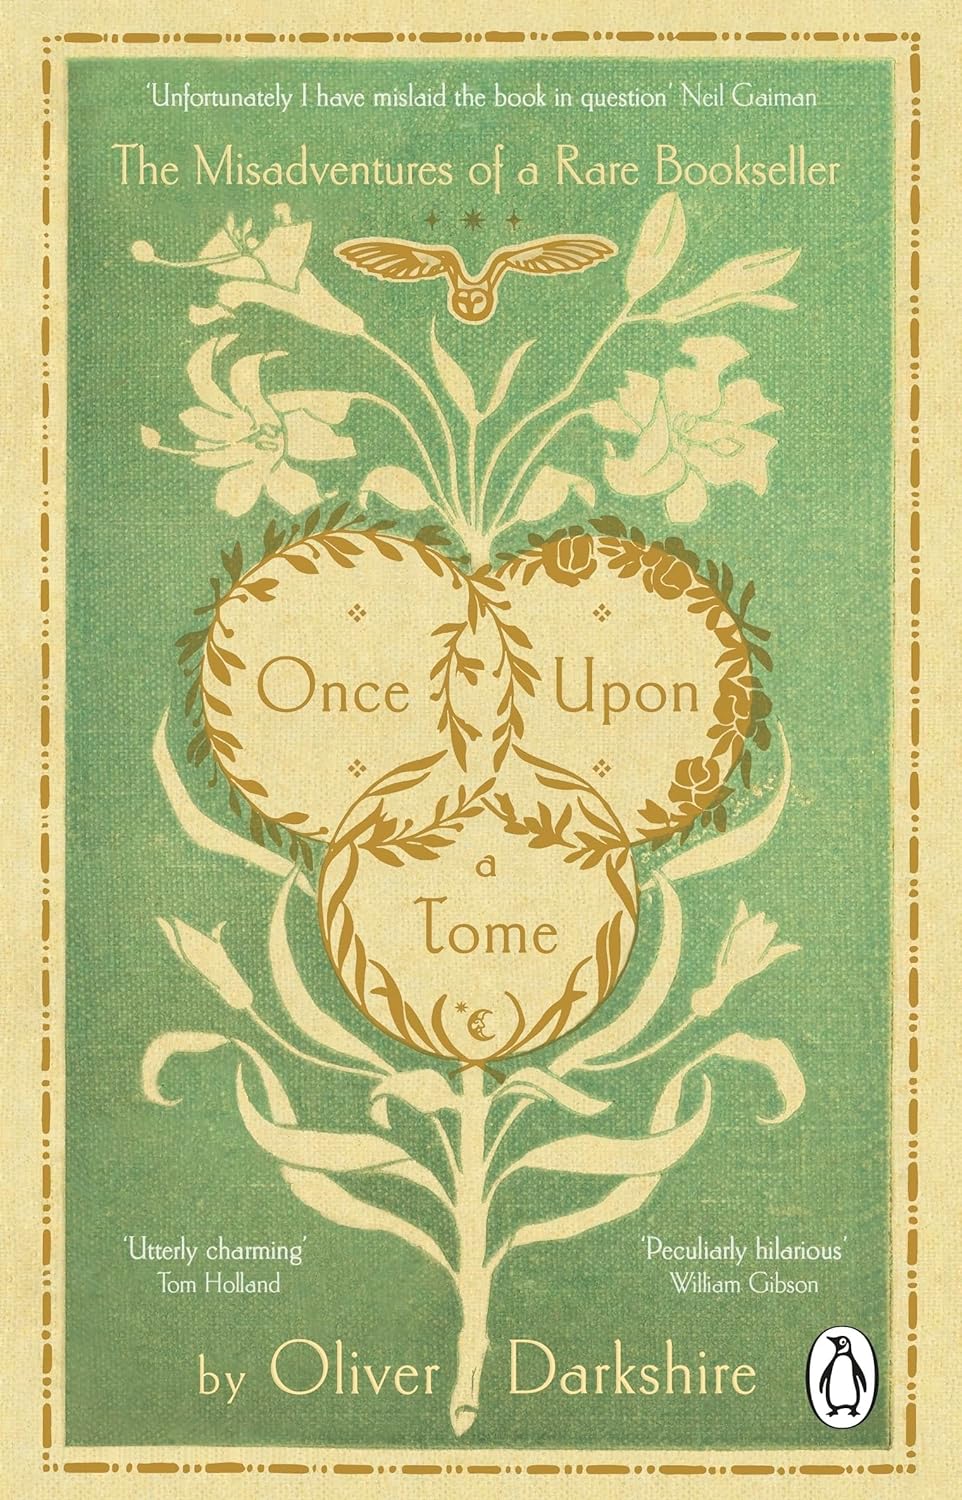 Once Upon a Tome